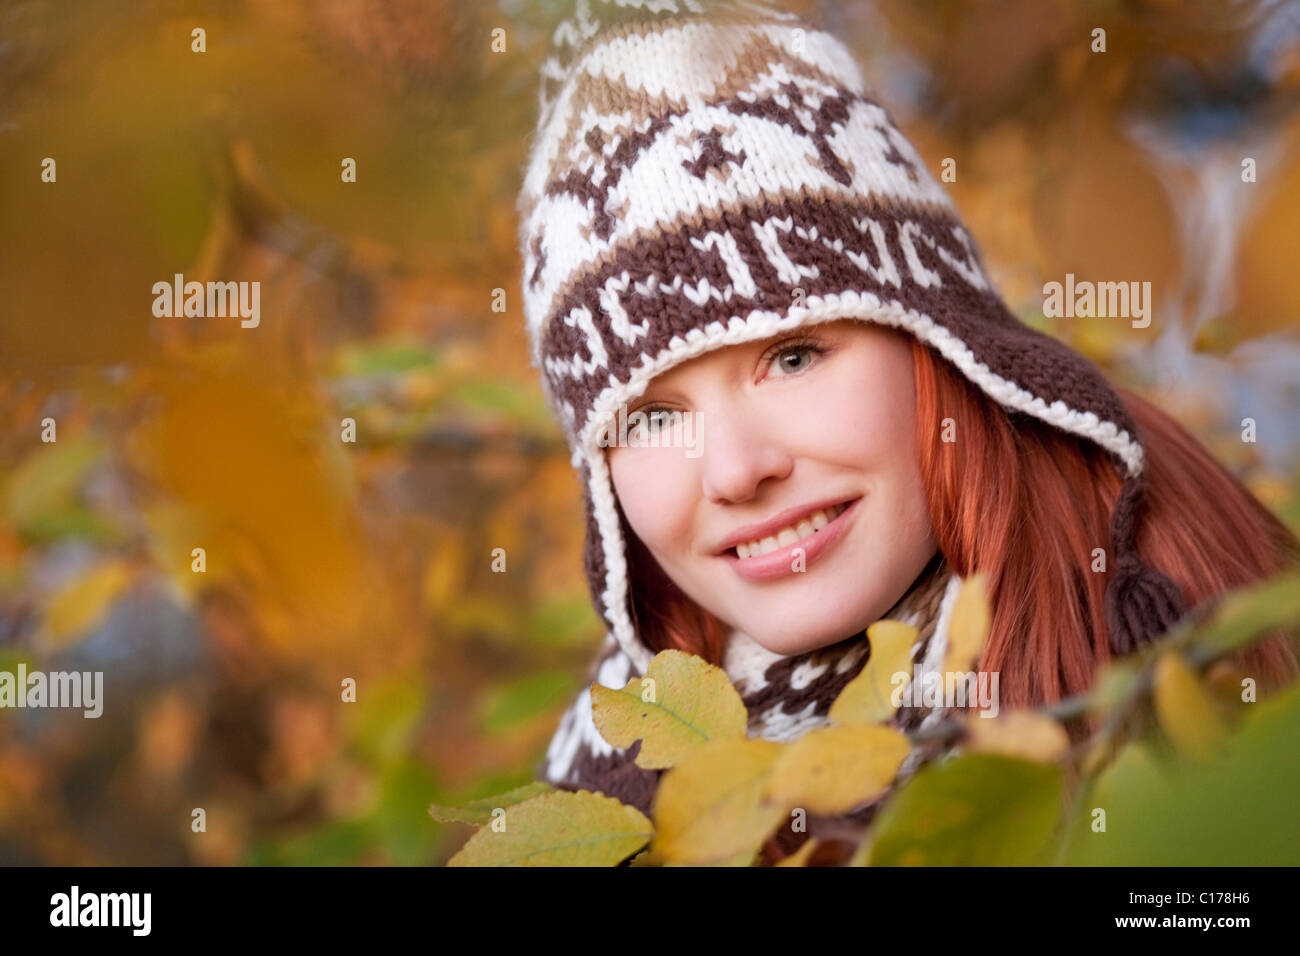 Young red haired woman wearing a woolen hat and scarf in an autumnal forest Stock Photo